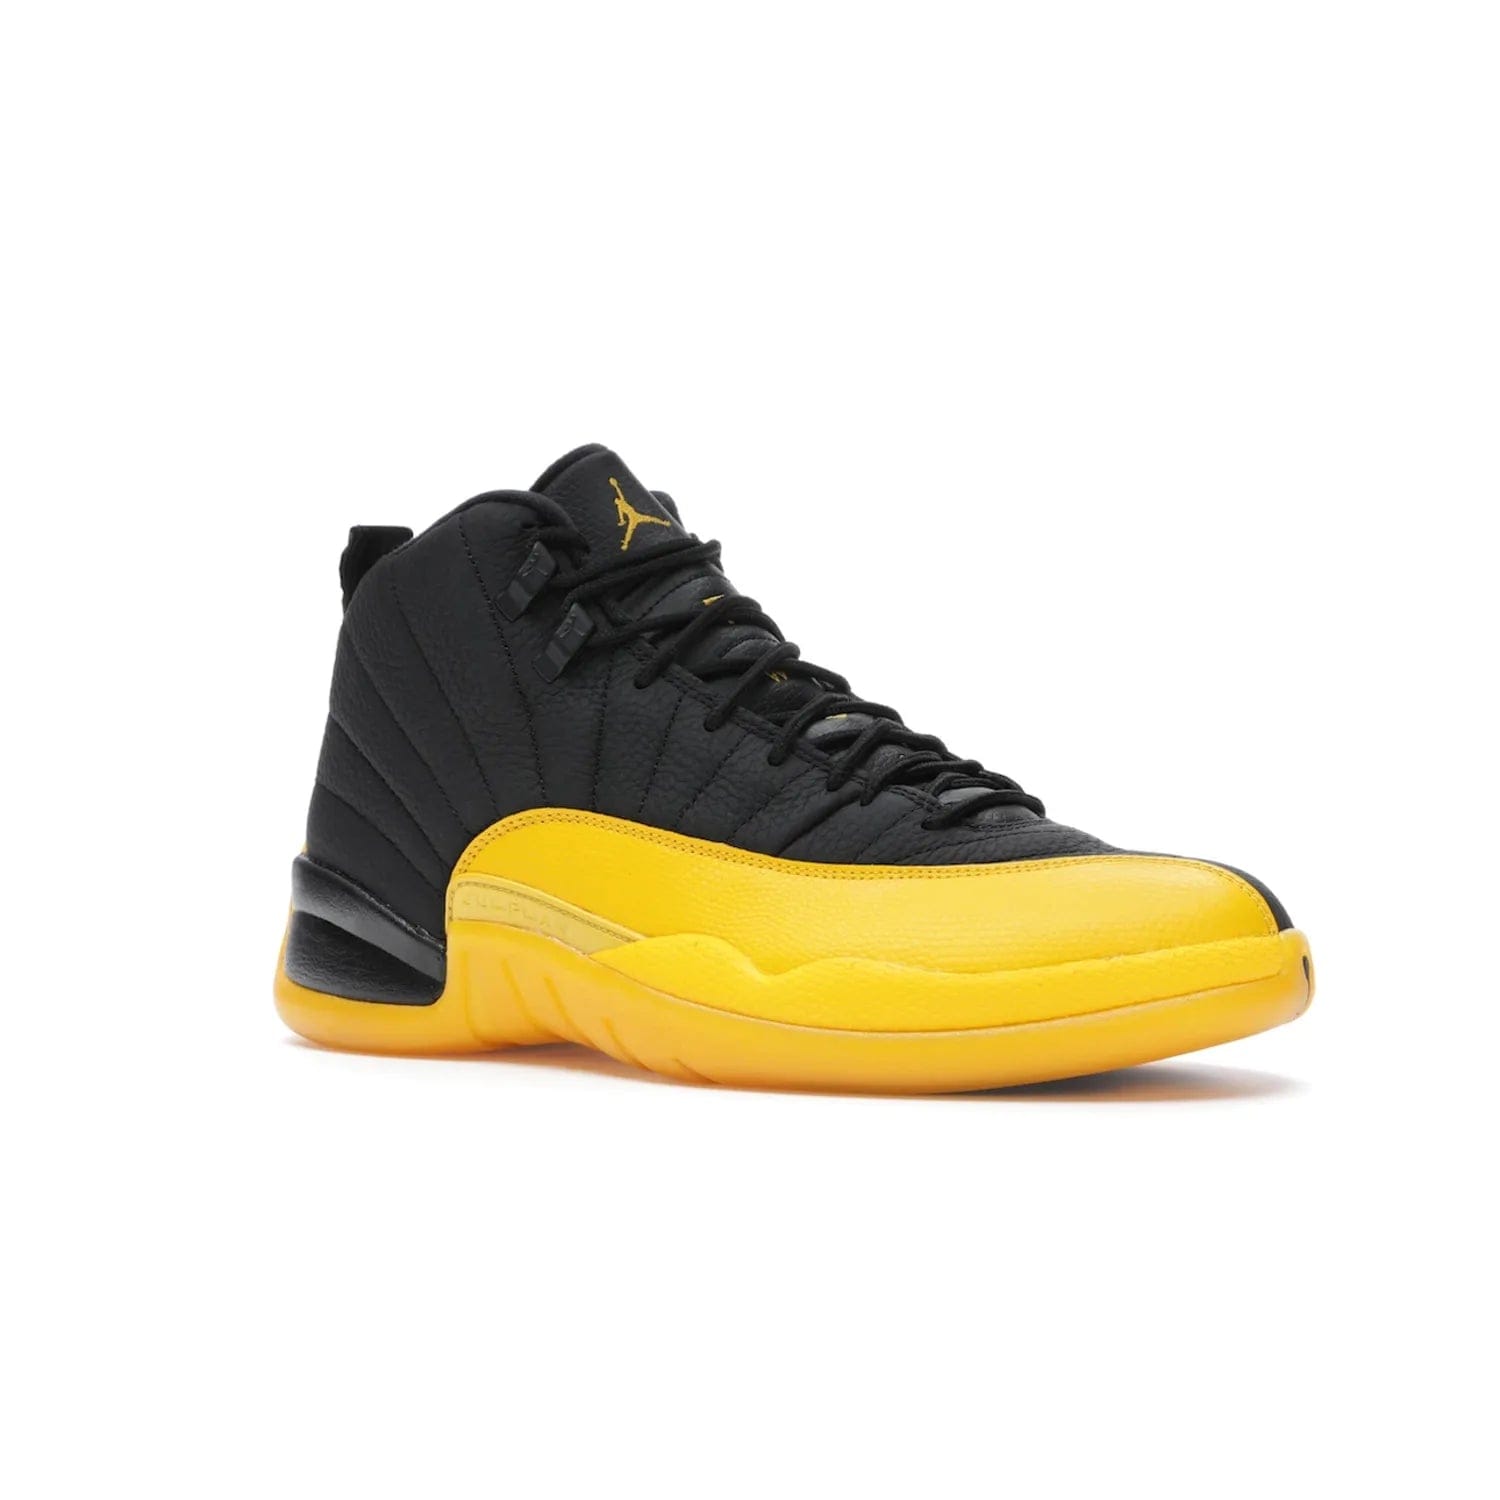 Jordan 12 Retro Black University Gold - Image 4 - Only at www.BallersClubKickz.com - This Jordan 12 Retro features a black tumbled leather upper and University Gold accents for a modern twist. Boasting Jordan "Two Three" branding and a yellow sole, these shoes will elevate your wardrobe. Fresh, sleek, and one of a kind - the Jordan 12 University Gold is your summer sneaker.